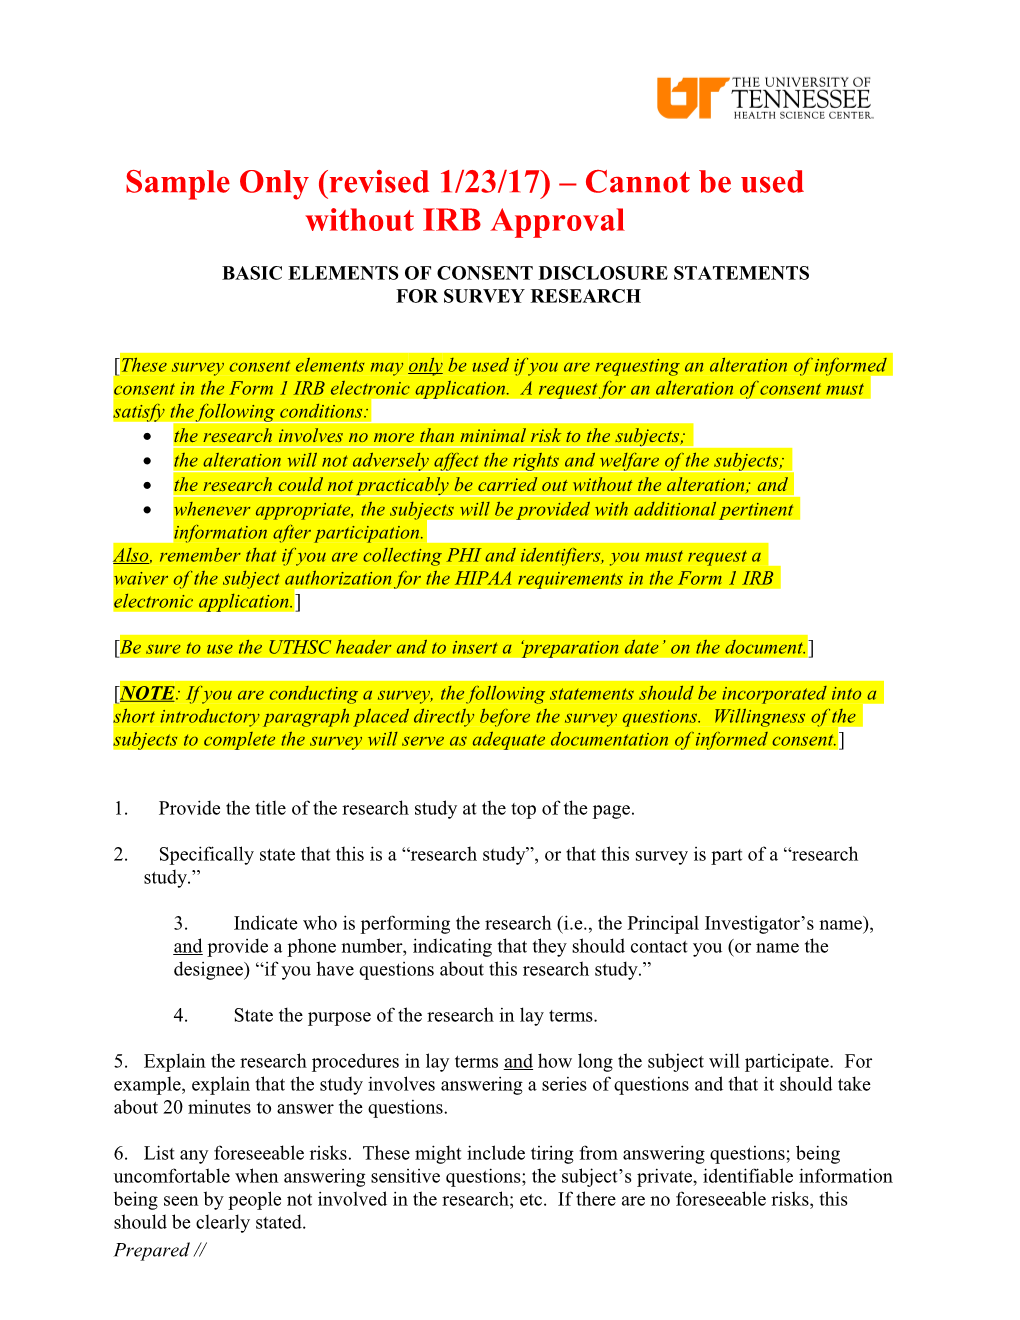 Sample Only (Revised 1/23/17) Cannot Be Used Without IRB Approval